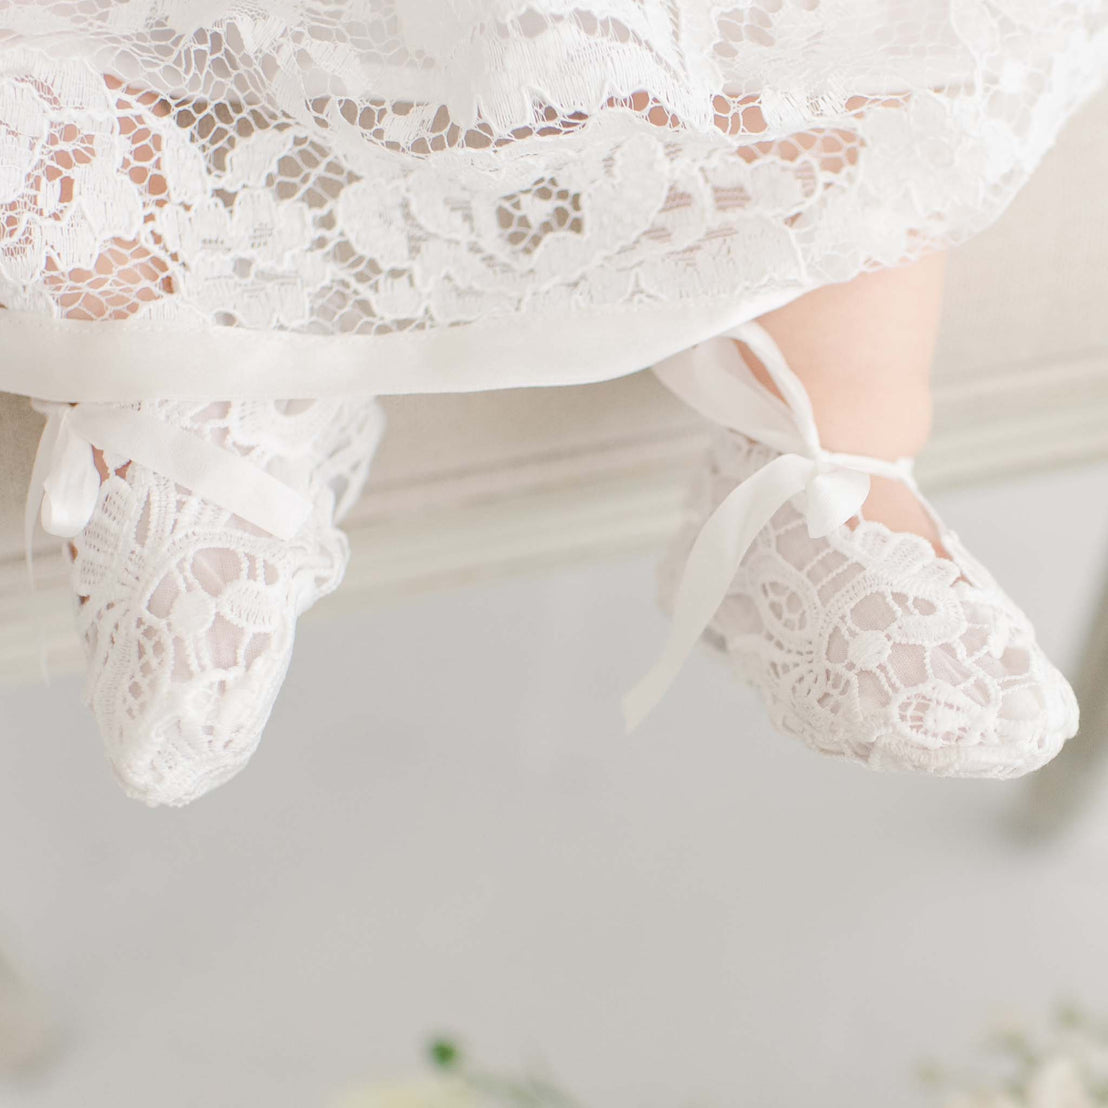 A close-up of a child's feet in delicate ivory-colored Rose Booties with silk bow ties, dangling above a soft, floral-decorated surface.